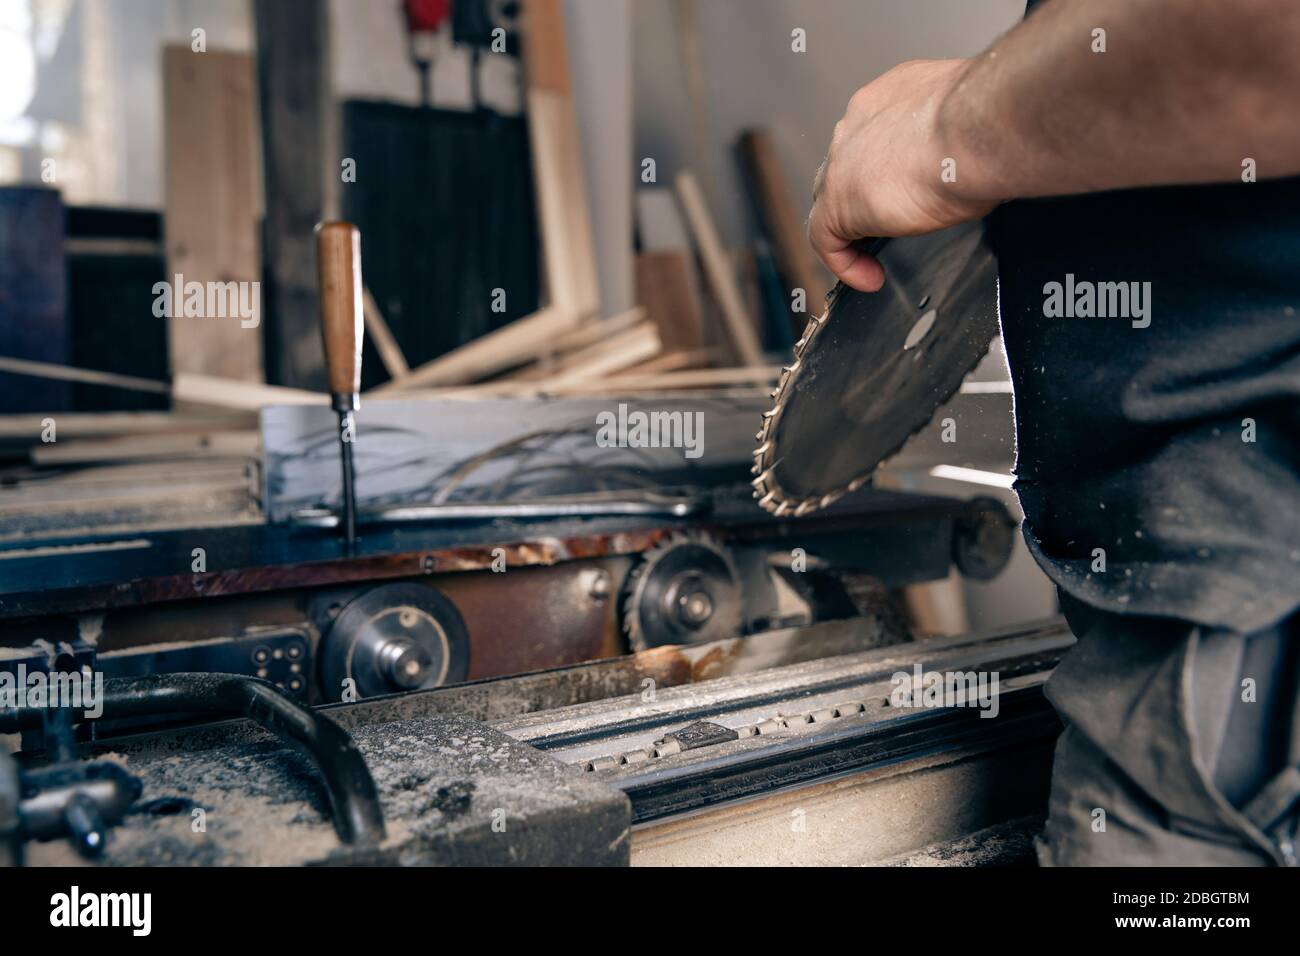 replacement of a gear cutting disc on a circular saw in a joinery. Stock Photo